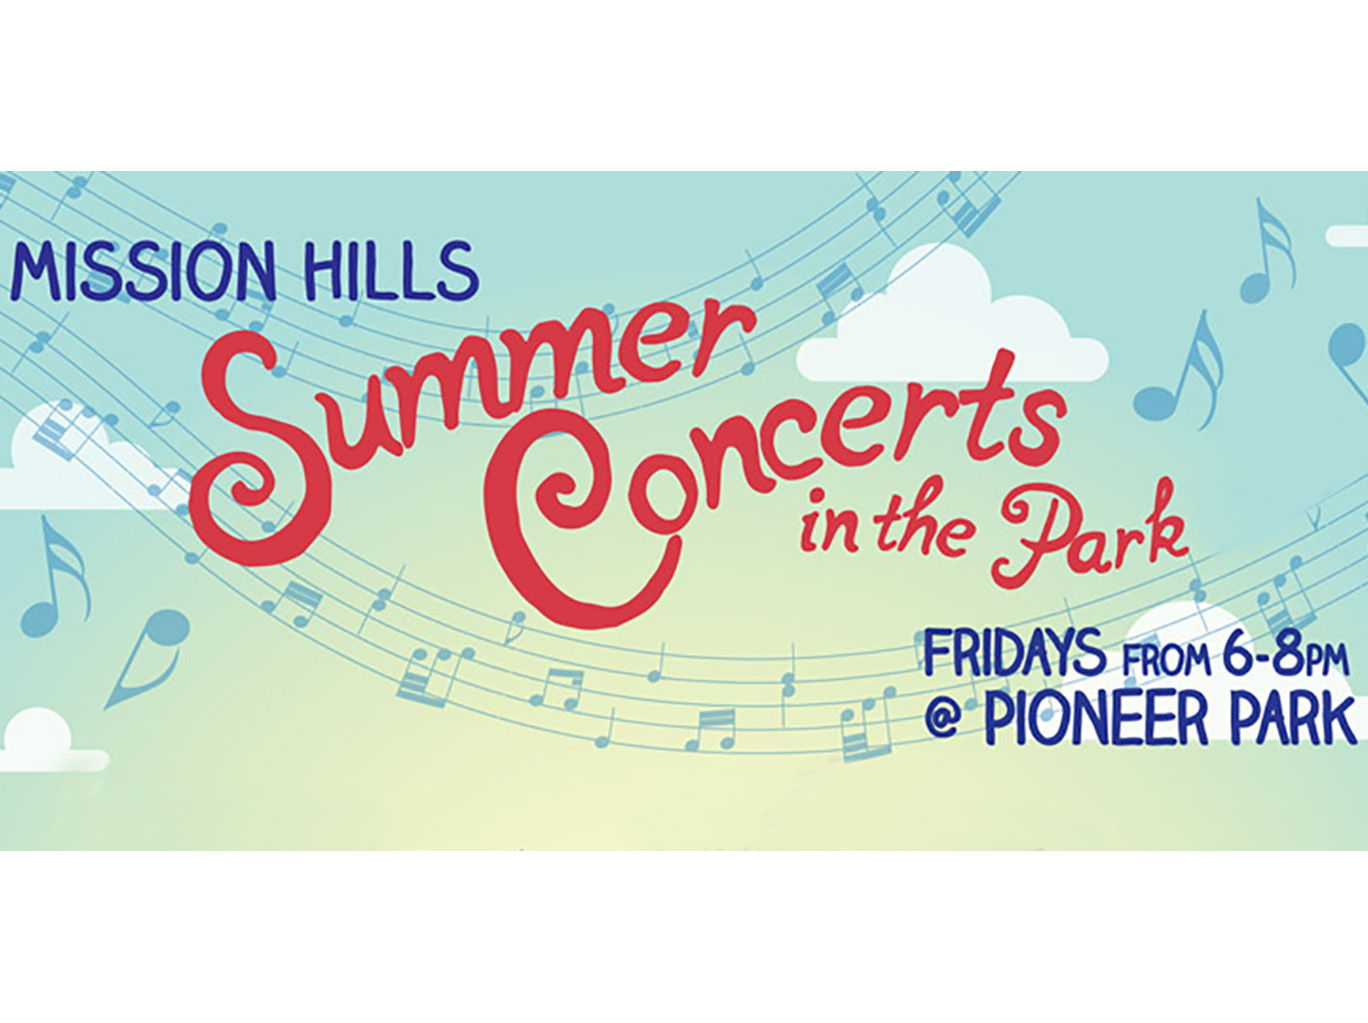 Mission Hills Summer Concerts in the Park San Diego, CA